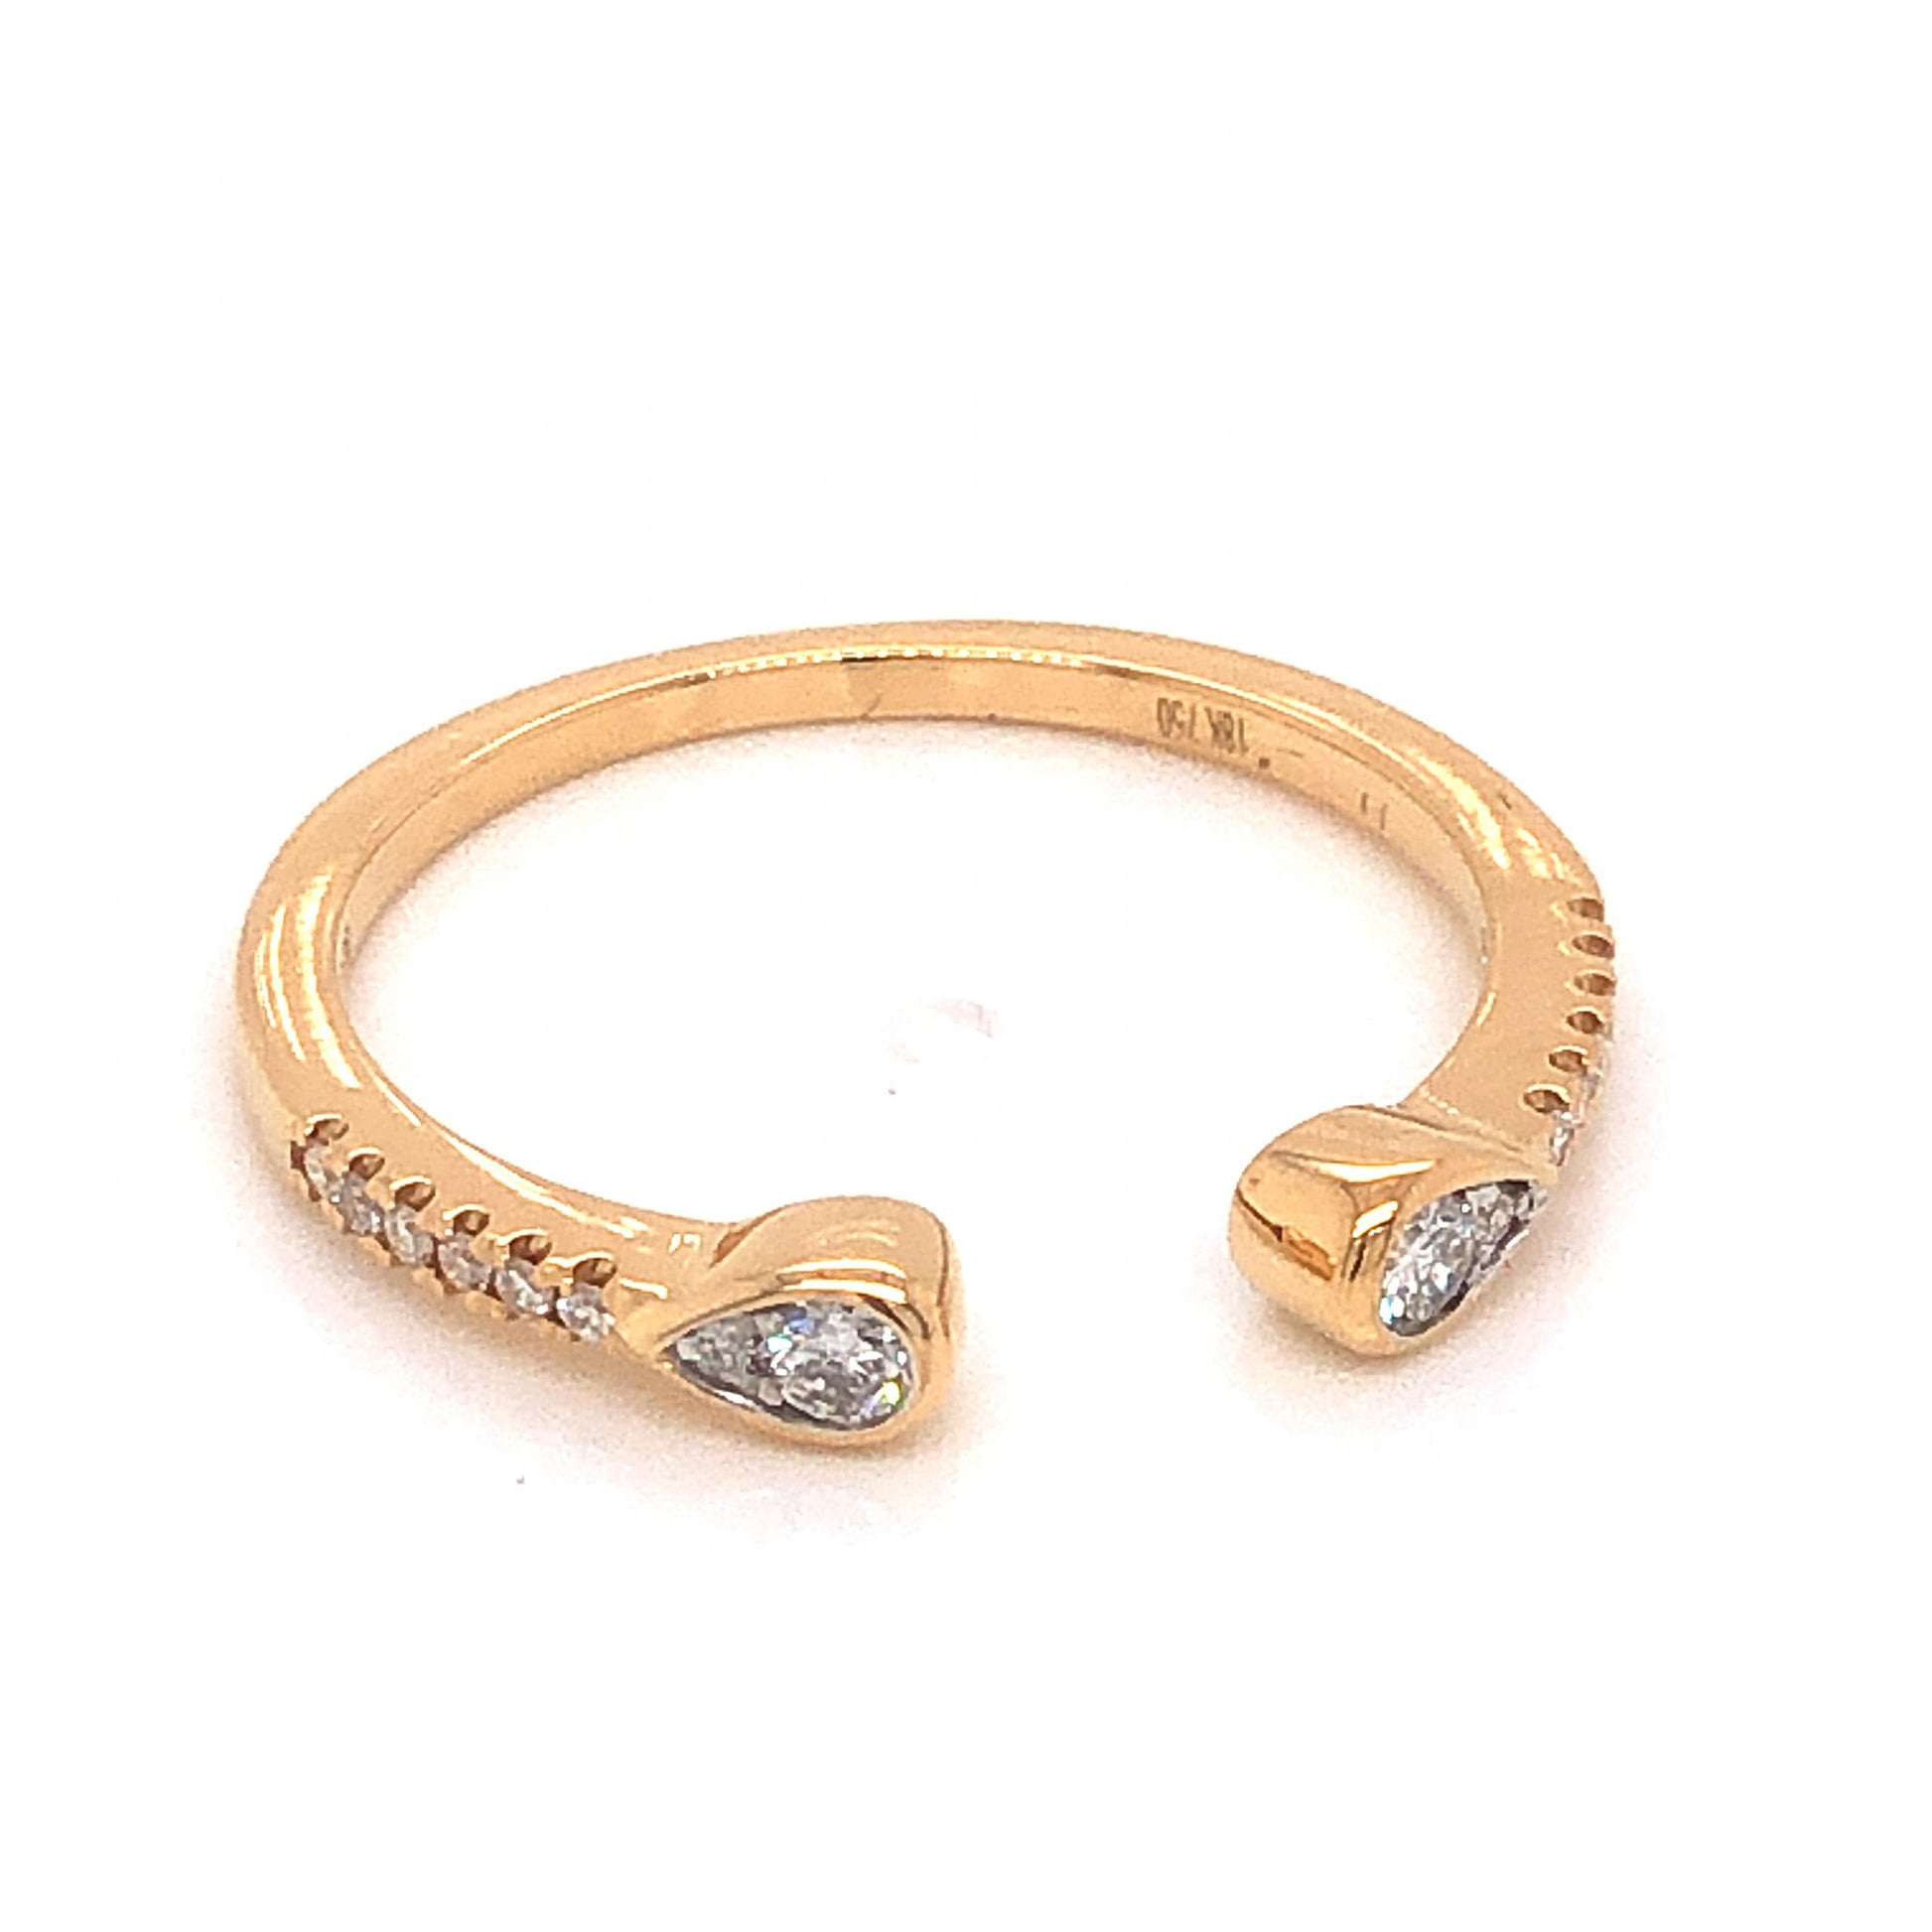 .14 Open Diamond Wedding Band in 18k Yellow GoldComposition: Platinum Ring Size: 7 Total Diamond Weight: .14ct Total Gram Weight: 1.8 g Inscription: 18K, 750, D0.136
      